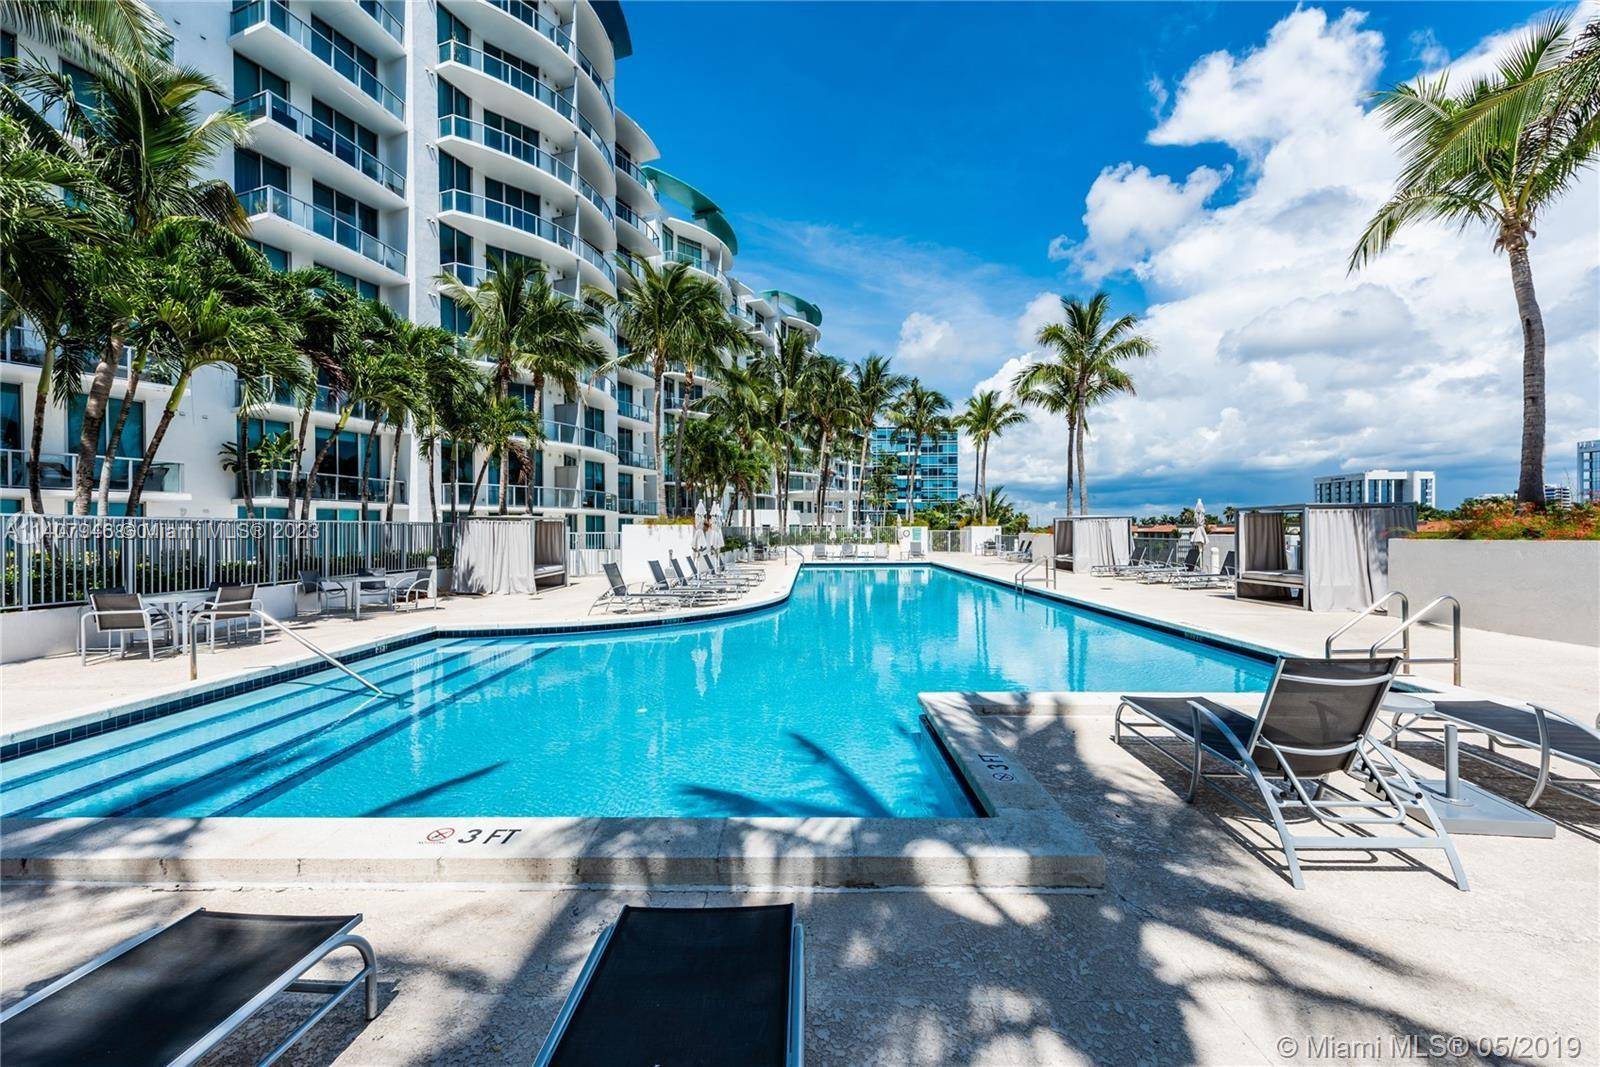 READ BROKER REMARKS UPDATED LOFT APARTMENT UTILITIES INCLUDED SEASONAL 6 month rental seasonal updated loft offers a prime location and abundant amenities for a luxurious lifestyle.